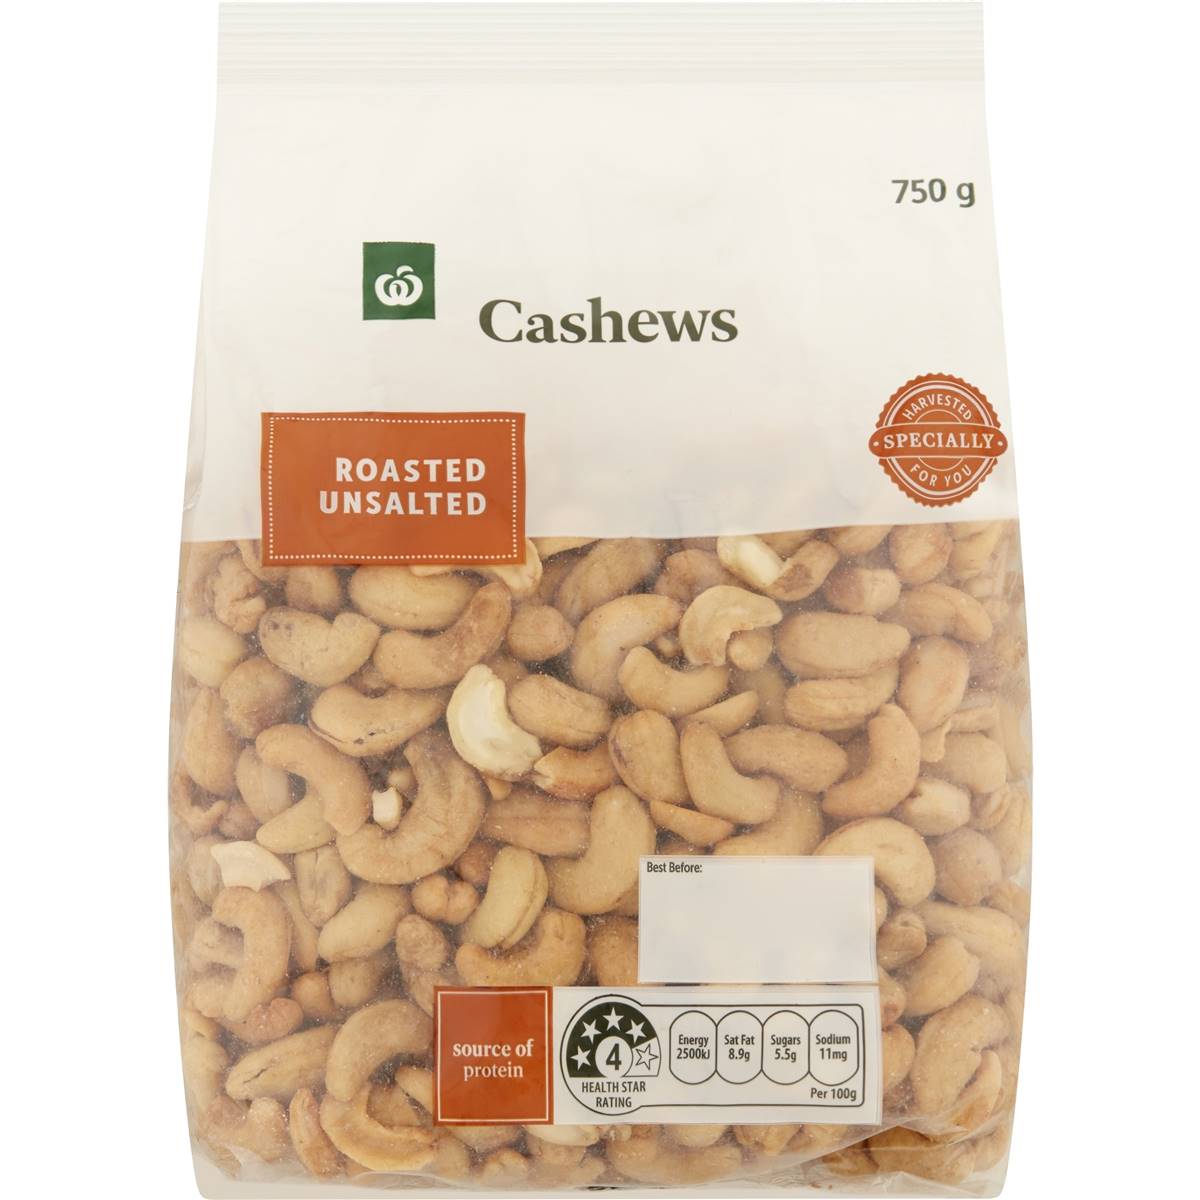 Calories in Woolworths Cashews Roasted & Unsalted